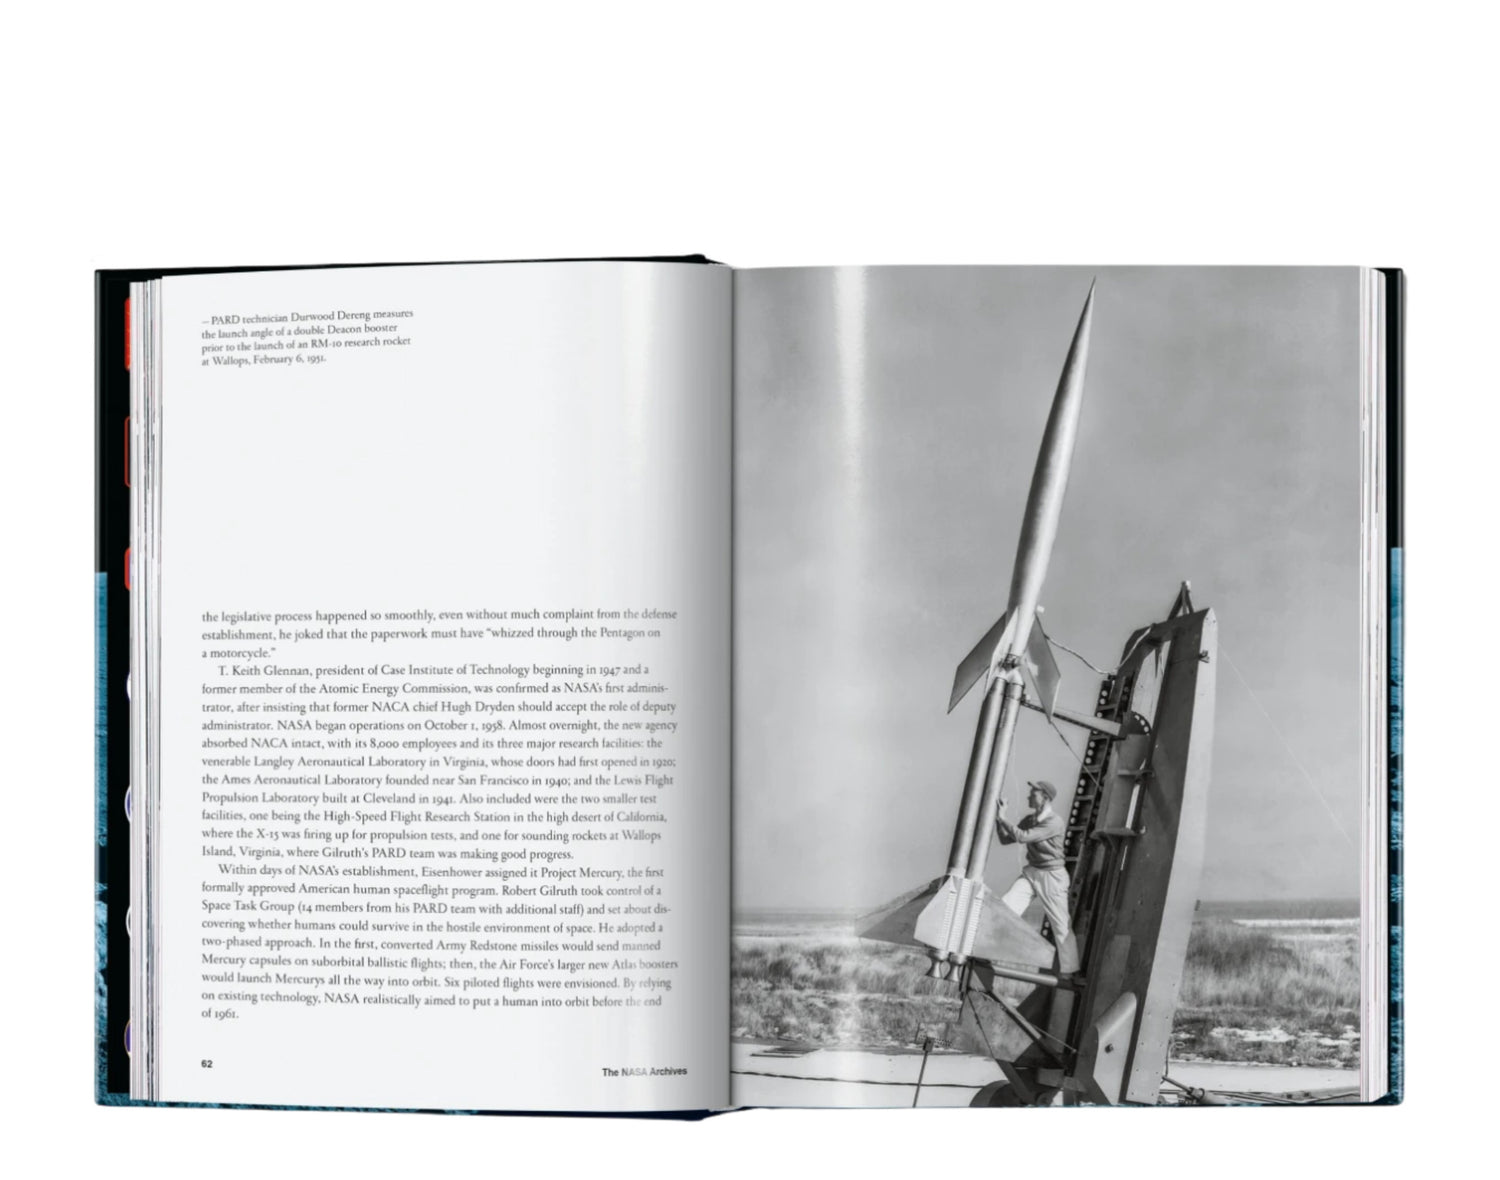 Taschen Books - The NASA Archives. 40th Anniversary Edition Hardcover Book